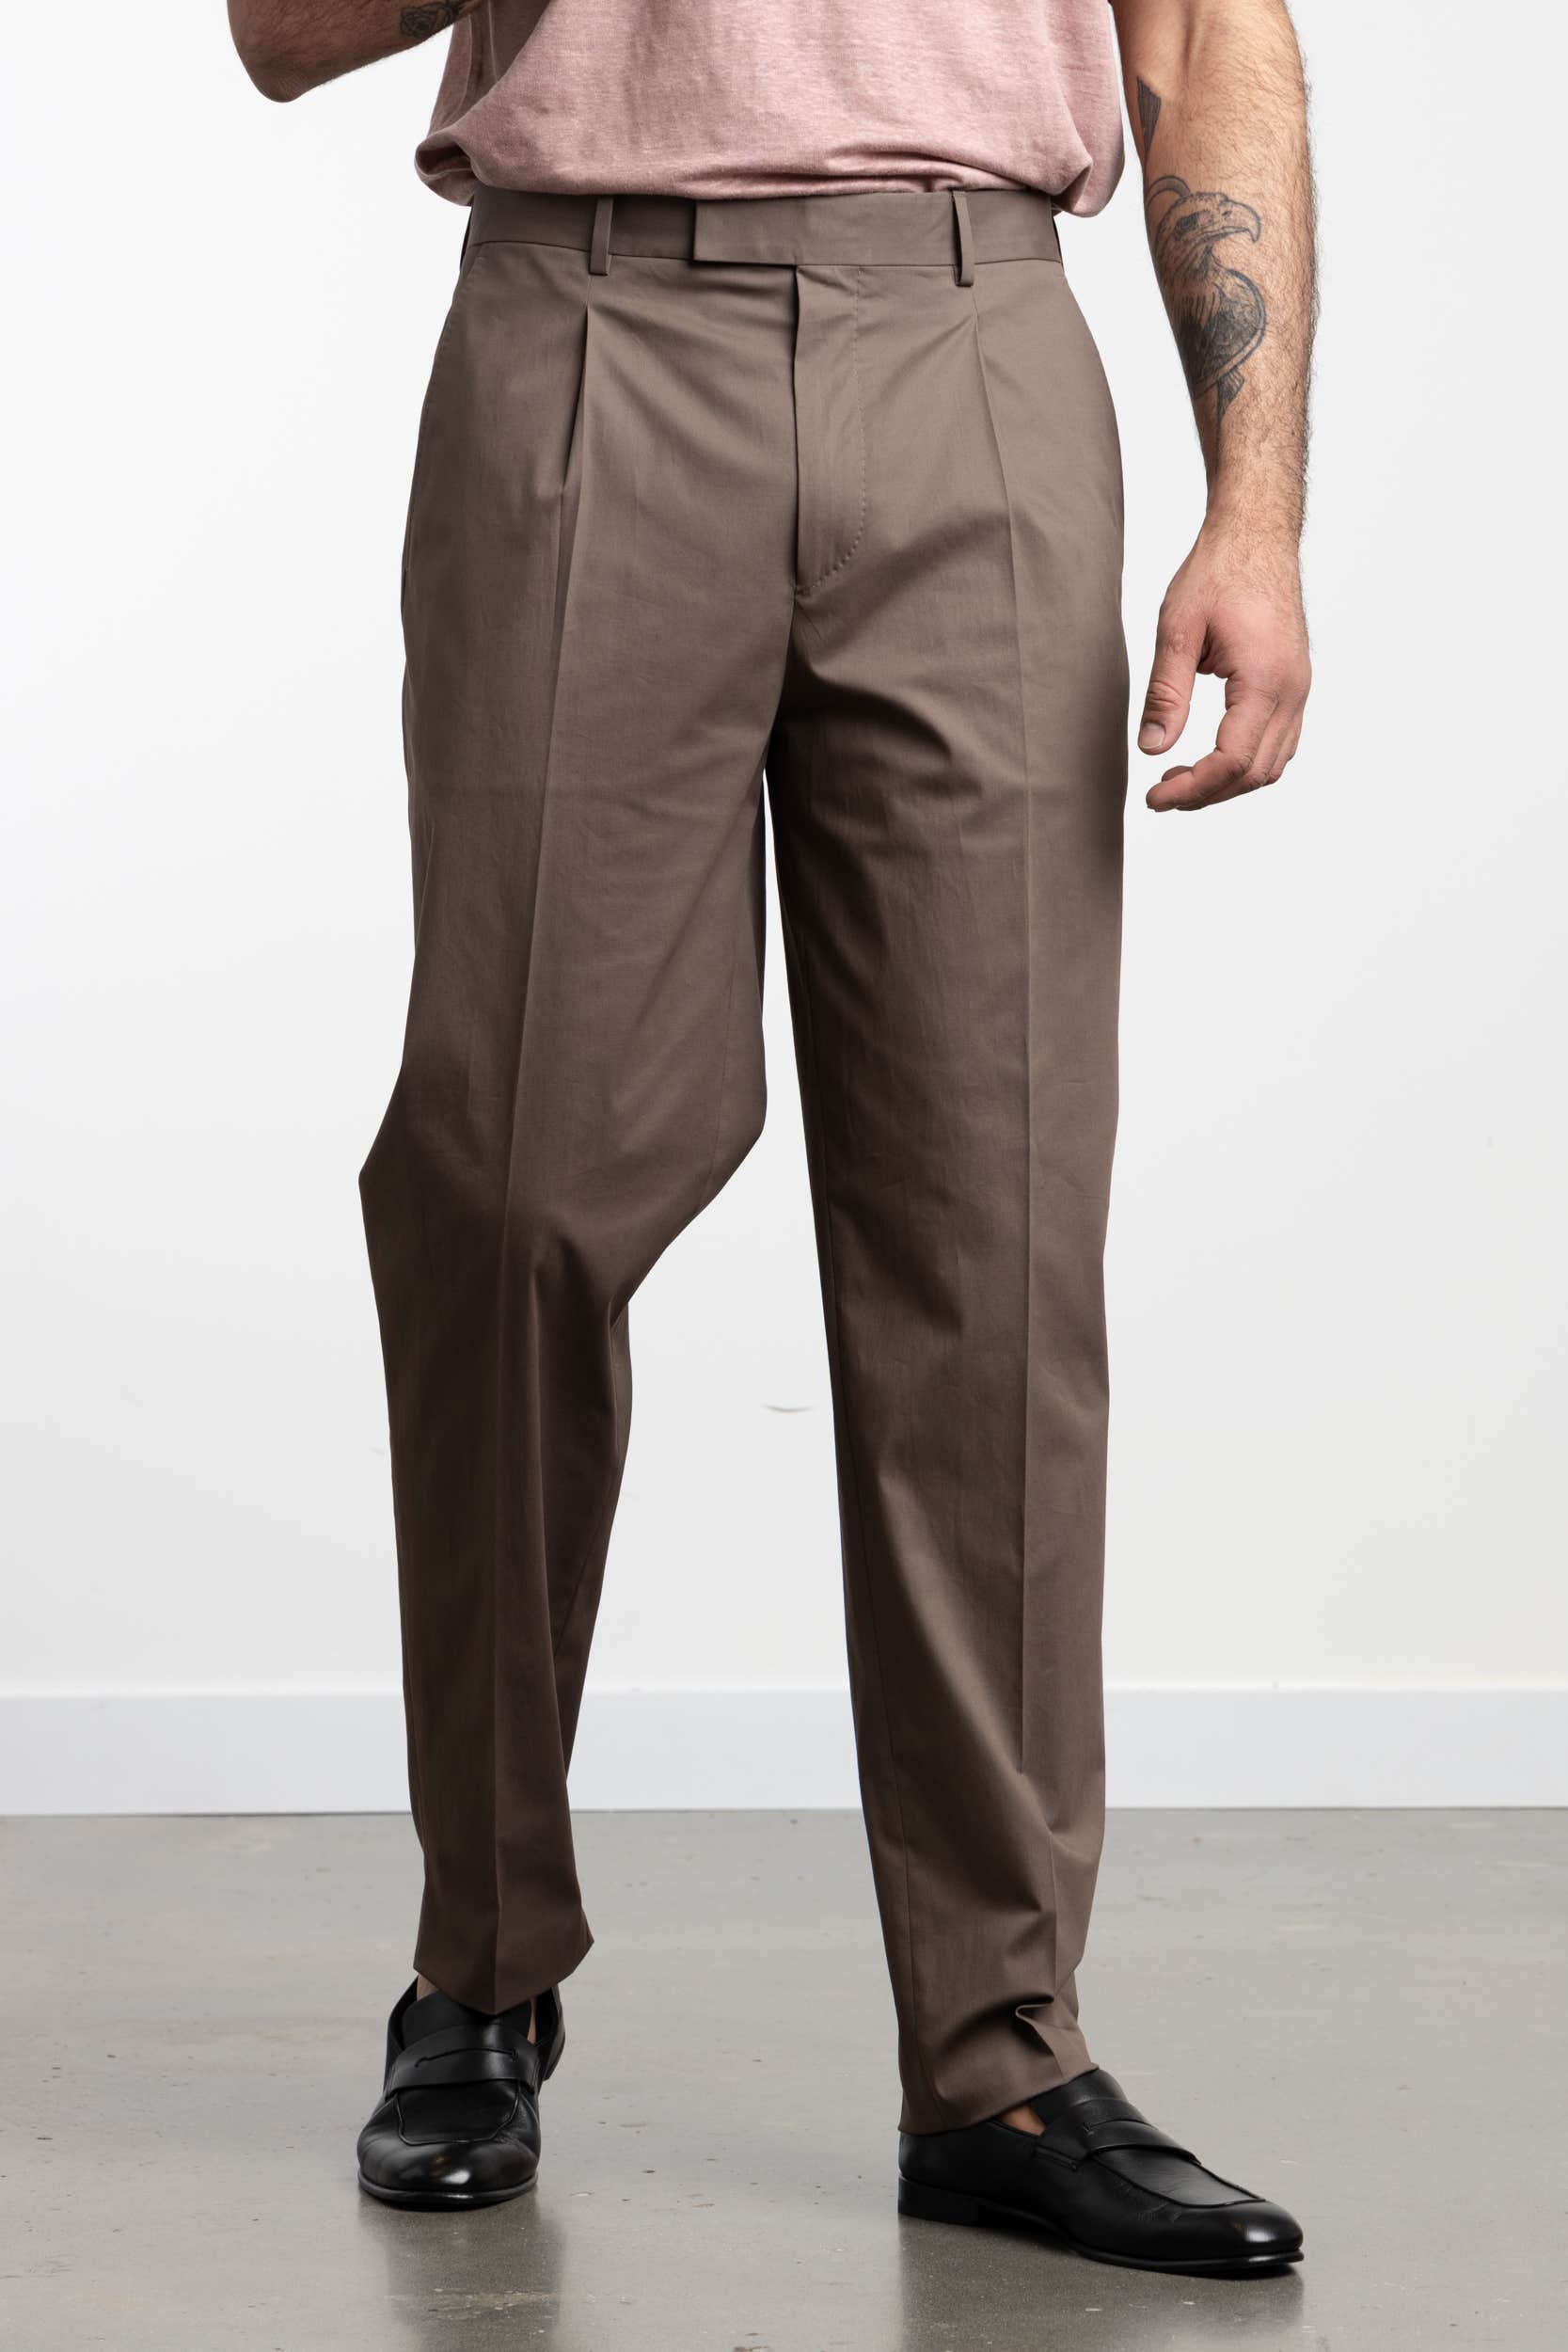 Brown Dress Pants – The Helm Clothing